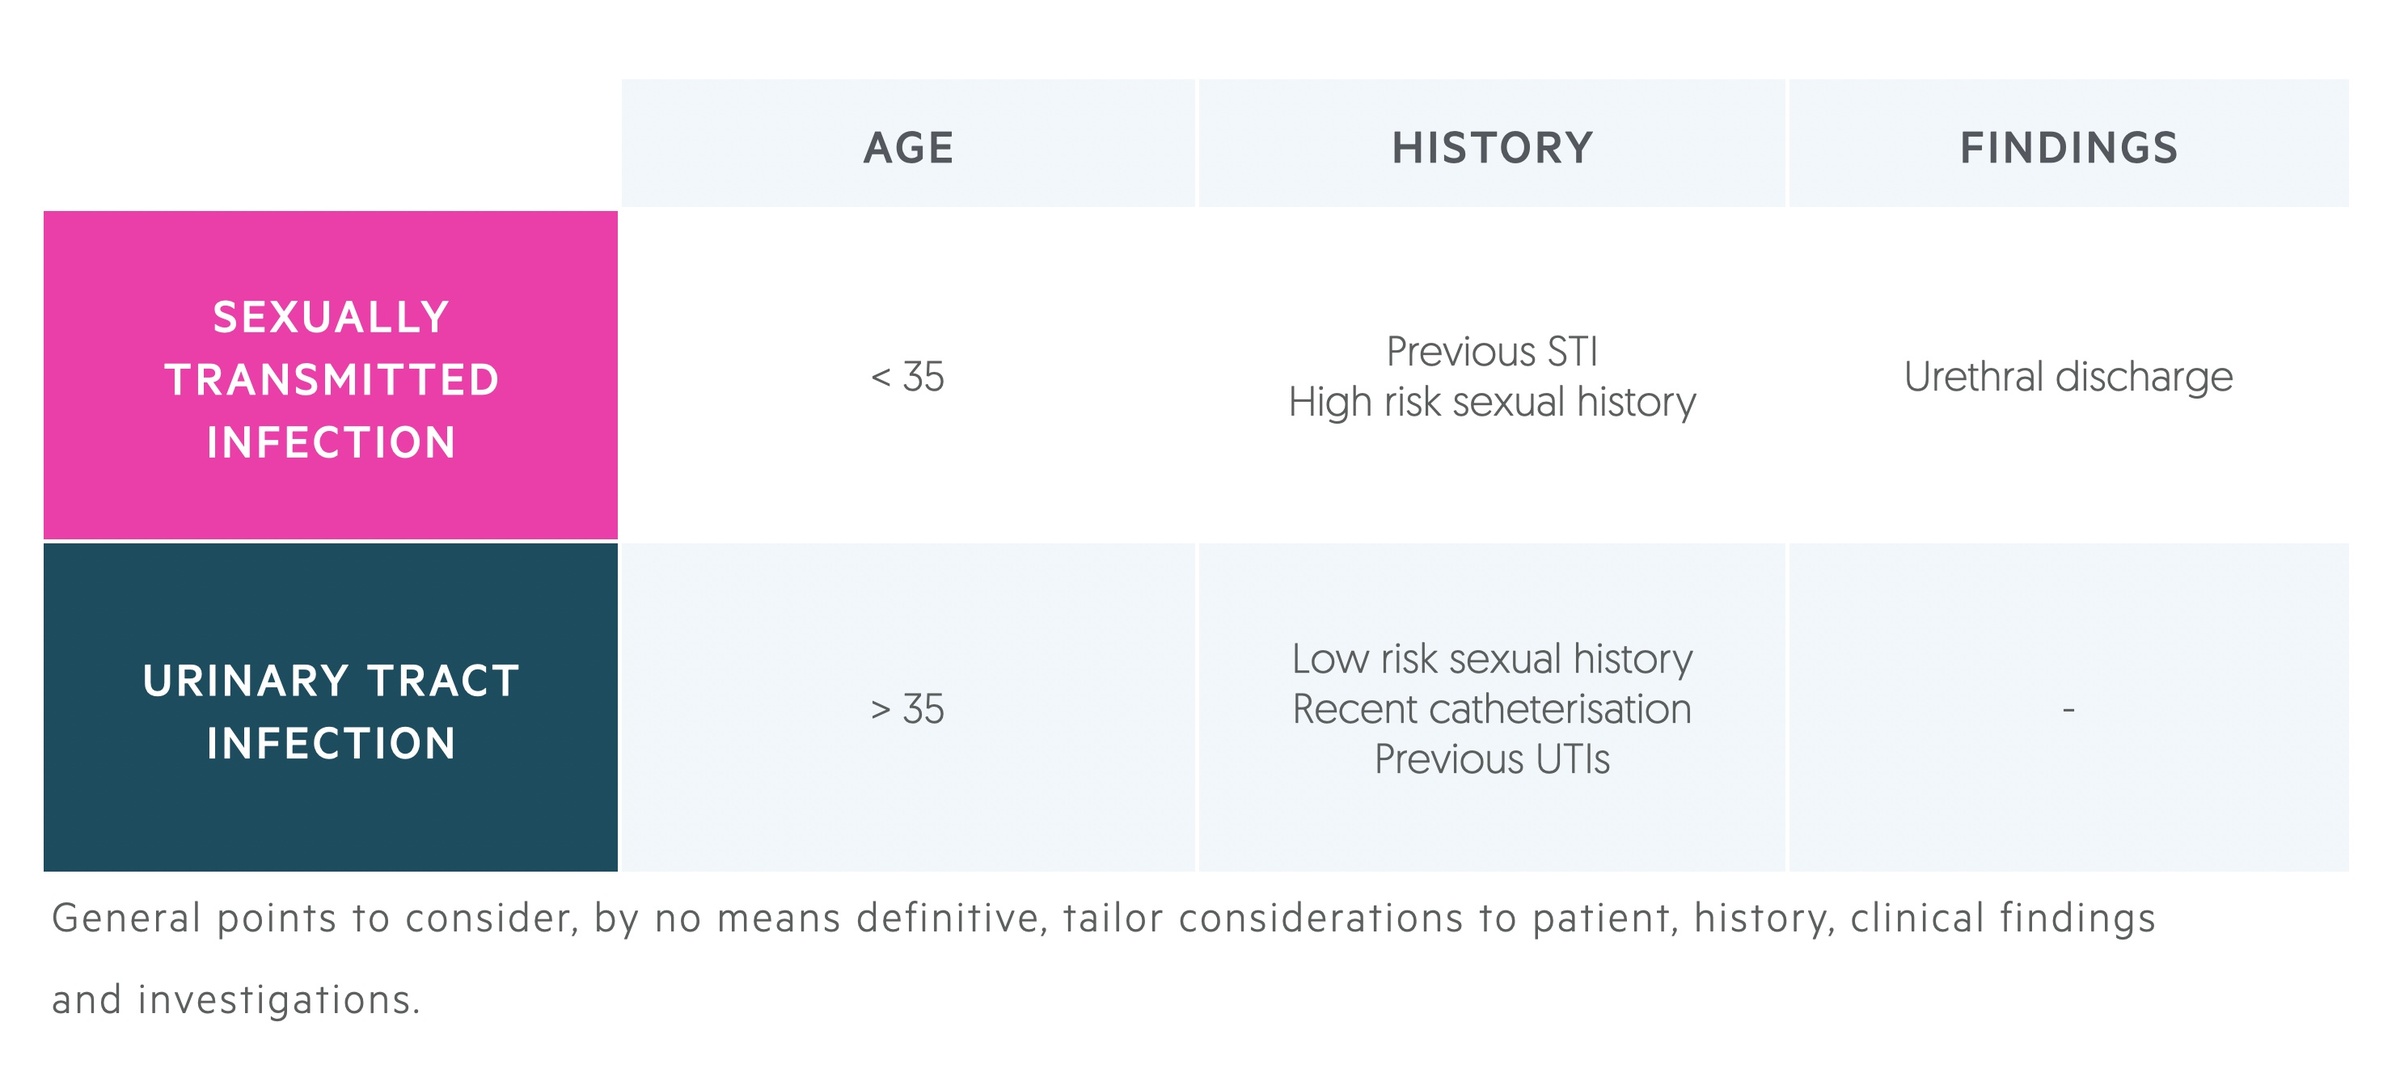 Comparing features of STI and UTI related epididymo-orchitis